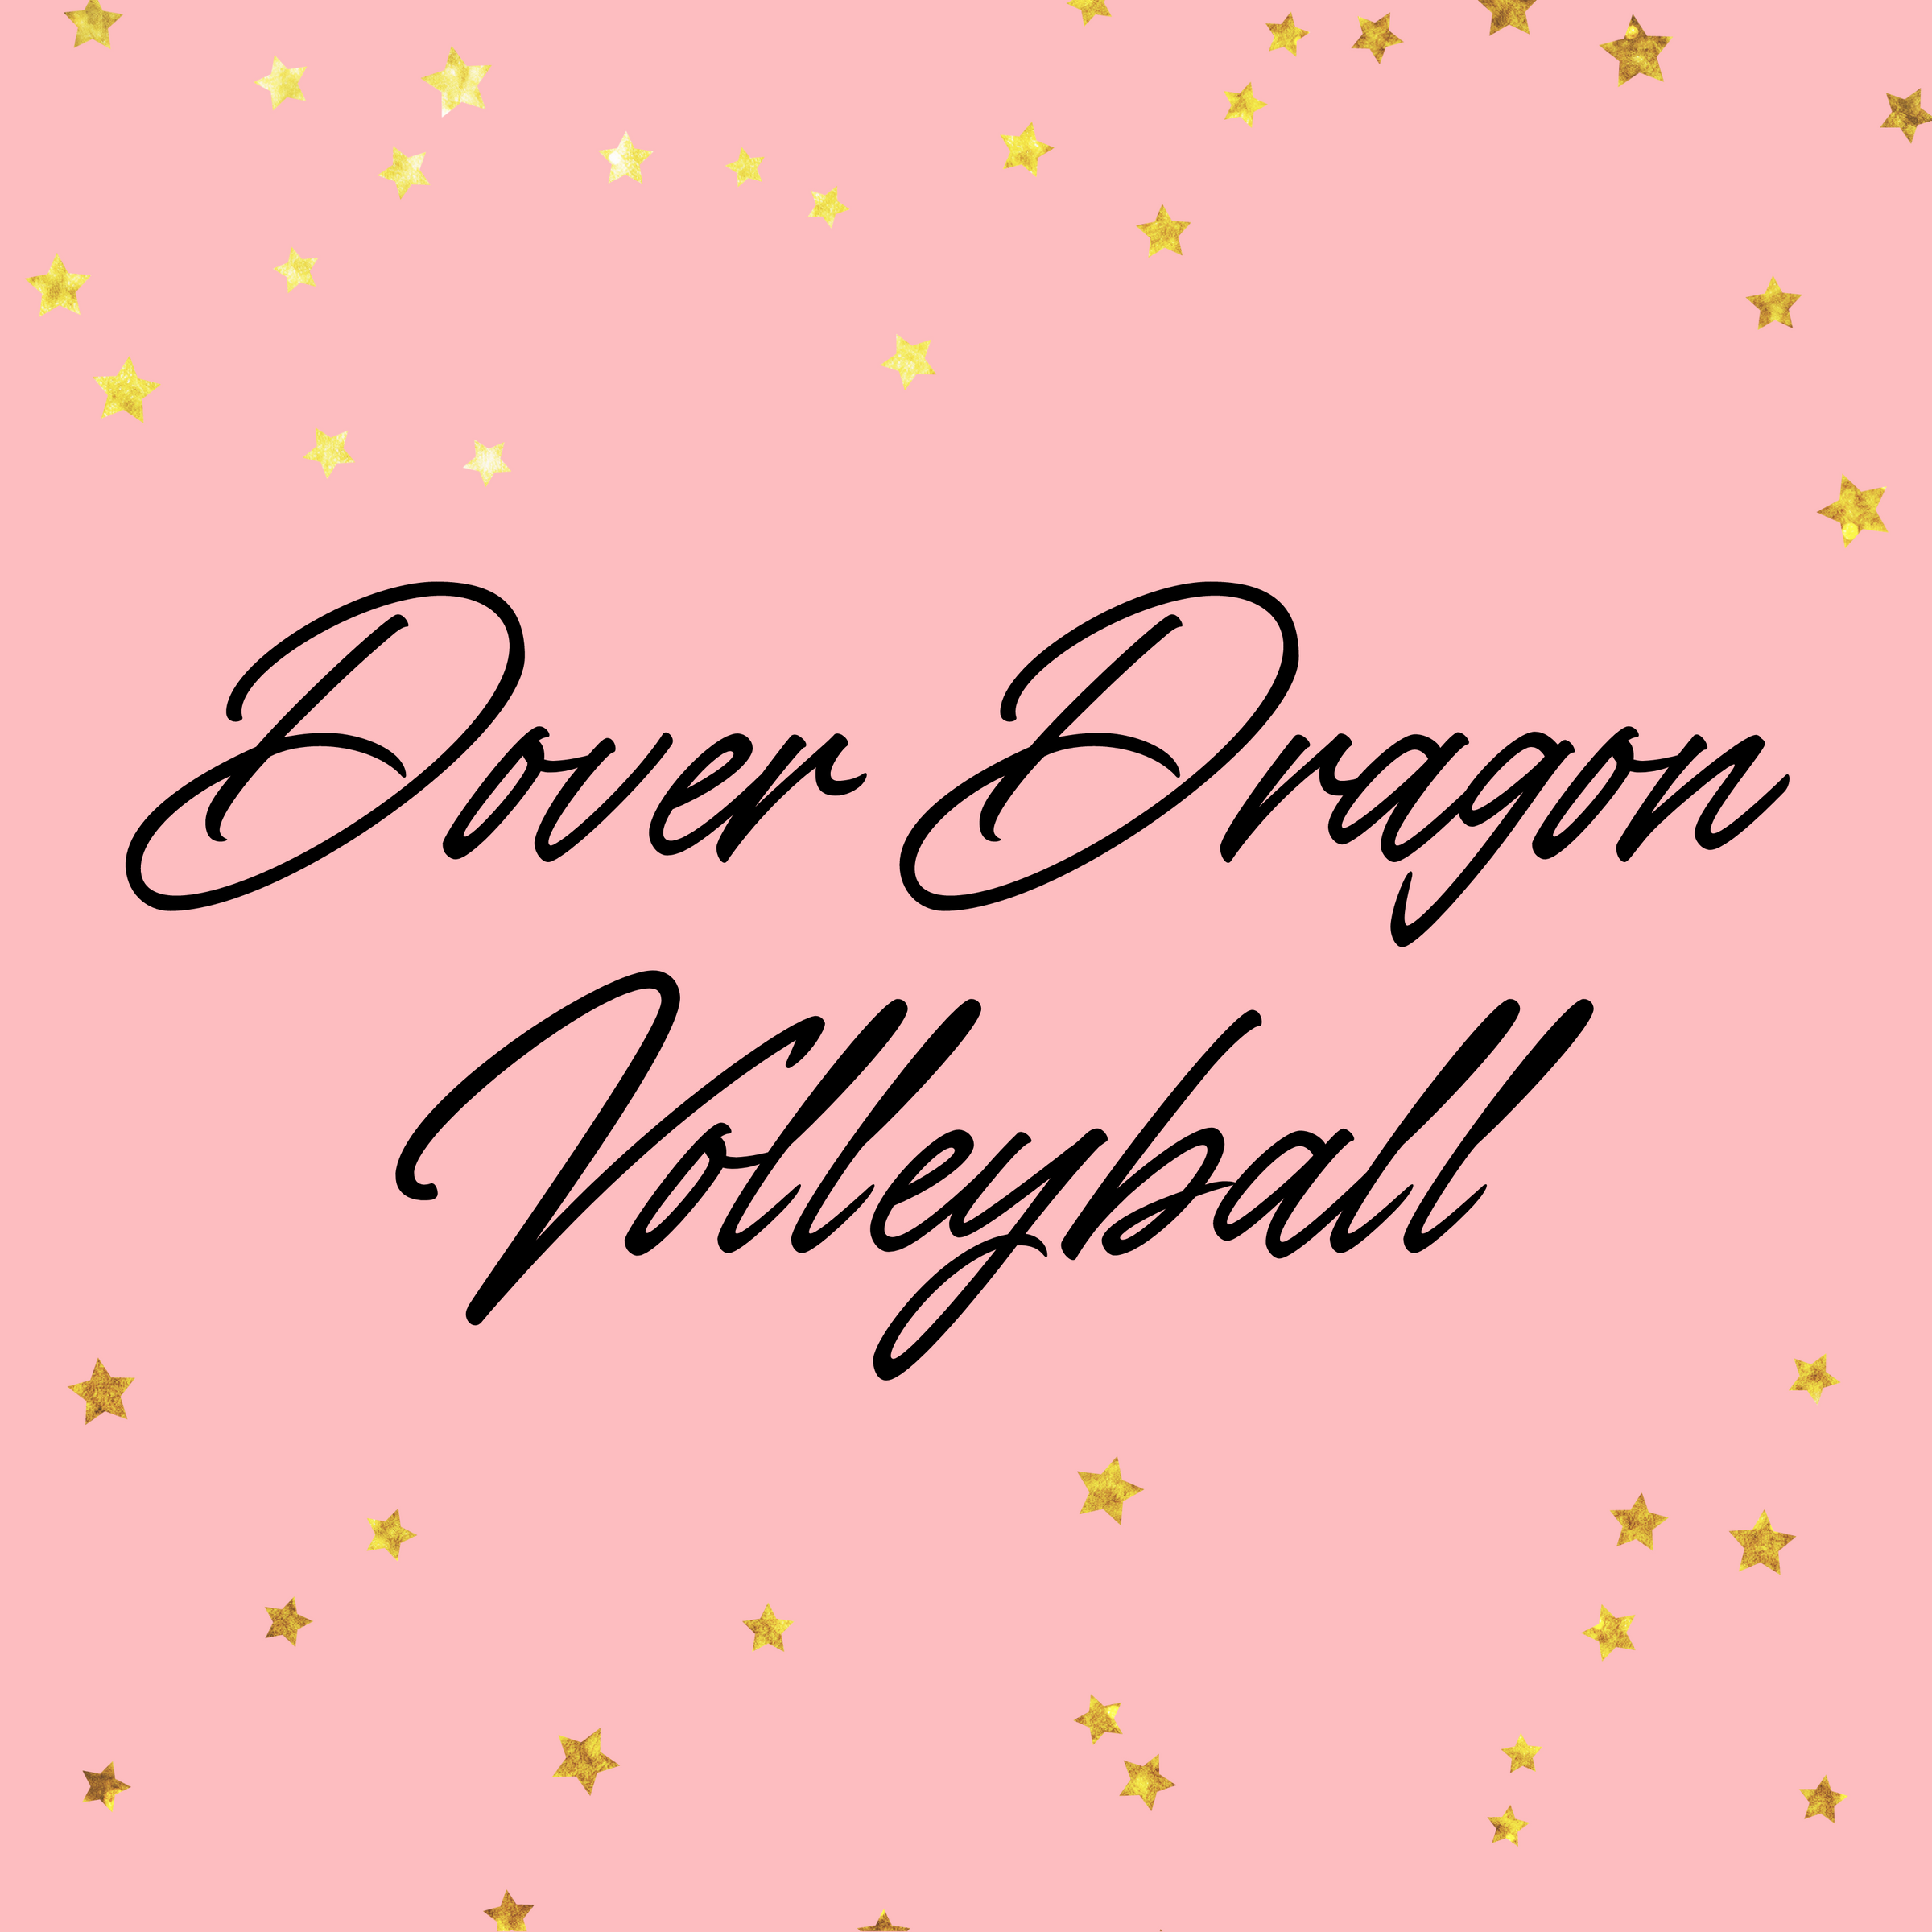 Dover Dragon Volleyball